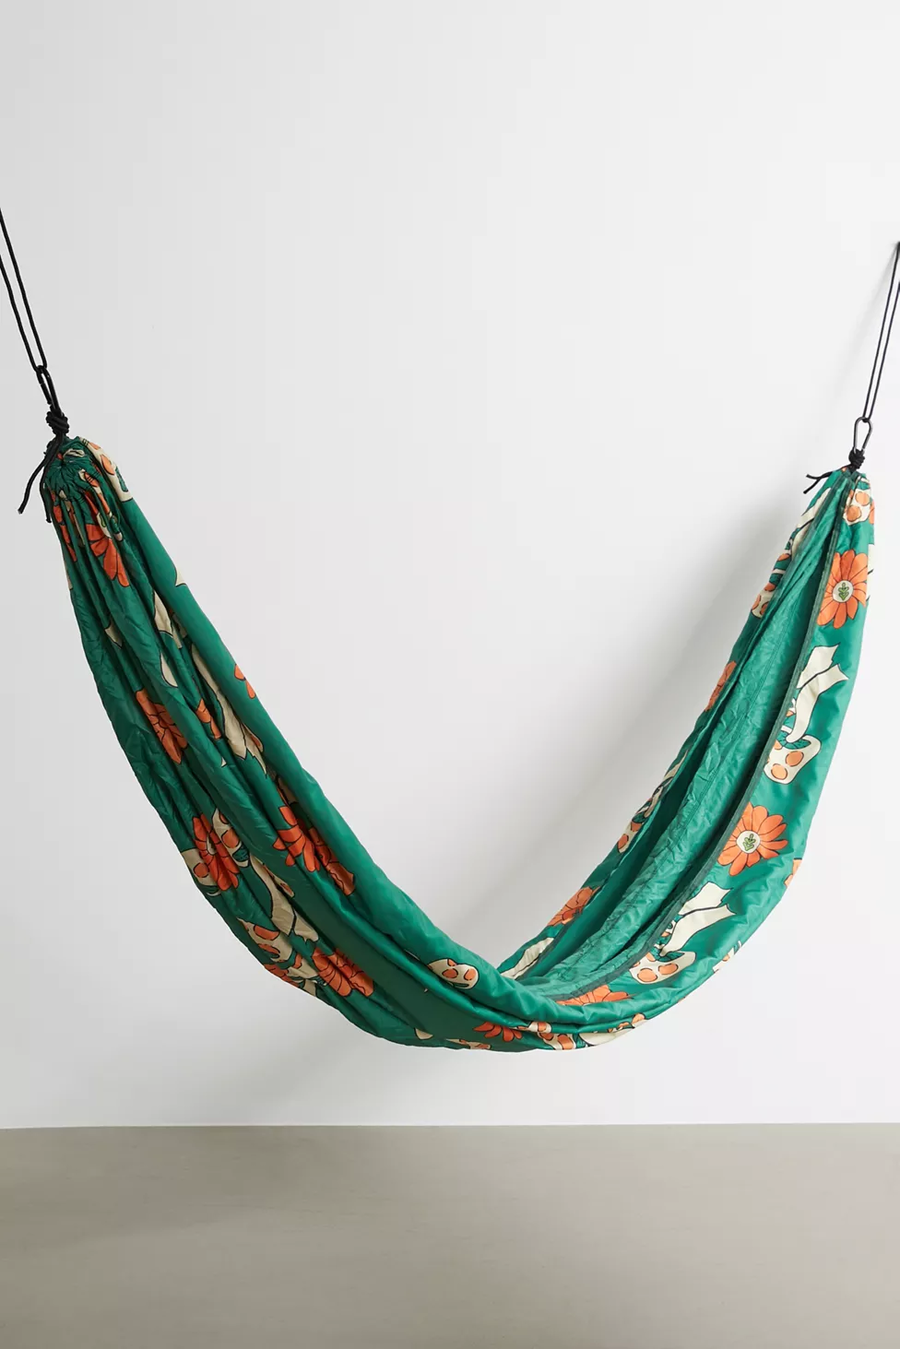 The Parks Project Mushroom 2-Person Hammock at Urban Outfitters